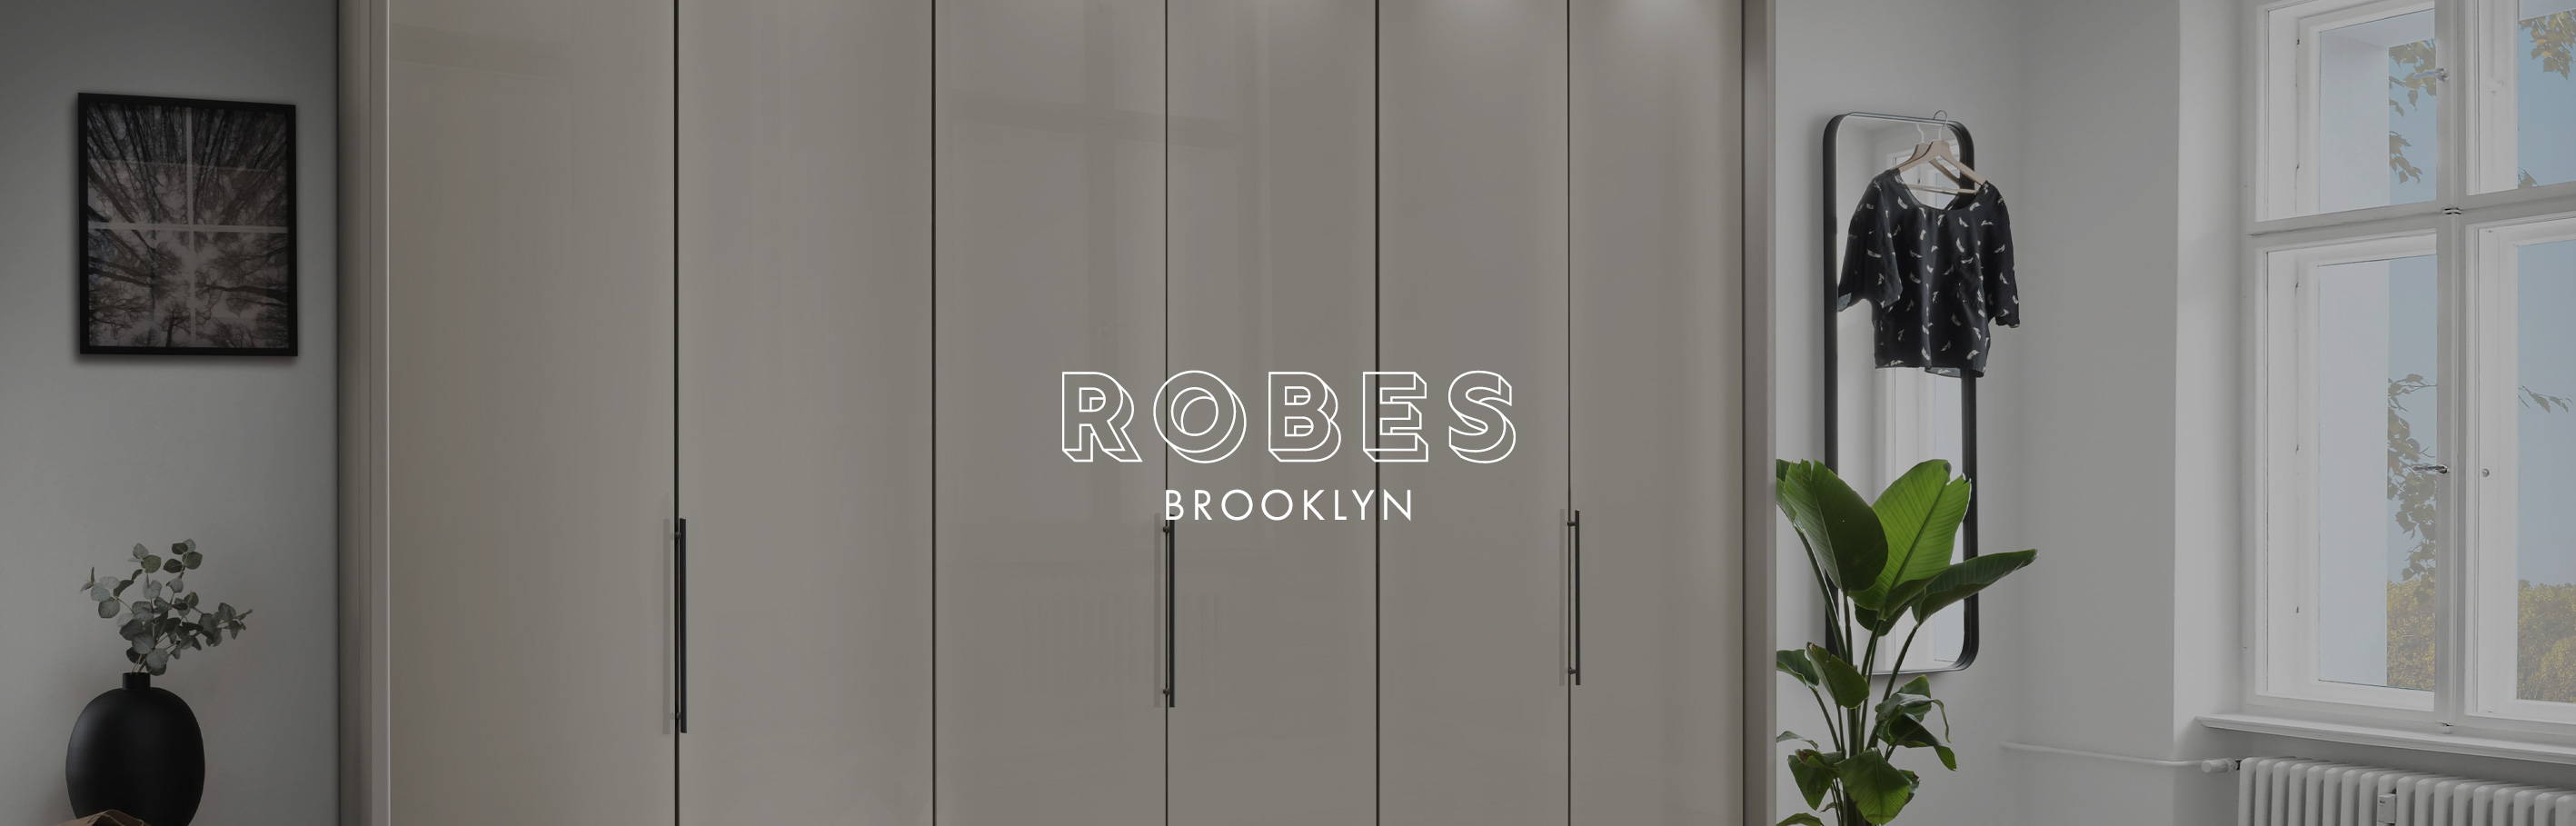 Brooklyn Modular Wardrobes - Shop The Collection Online - Or Customise In Store.